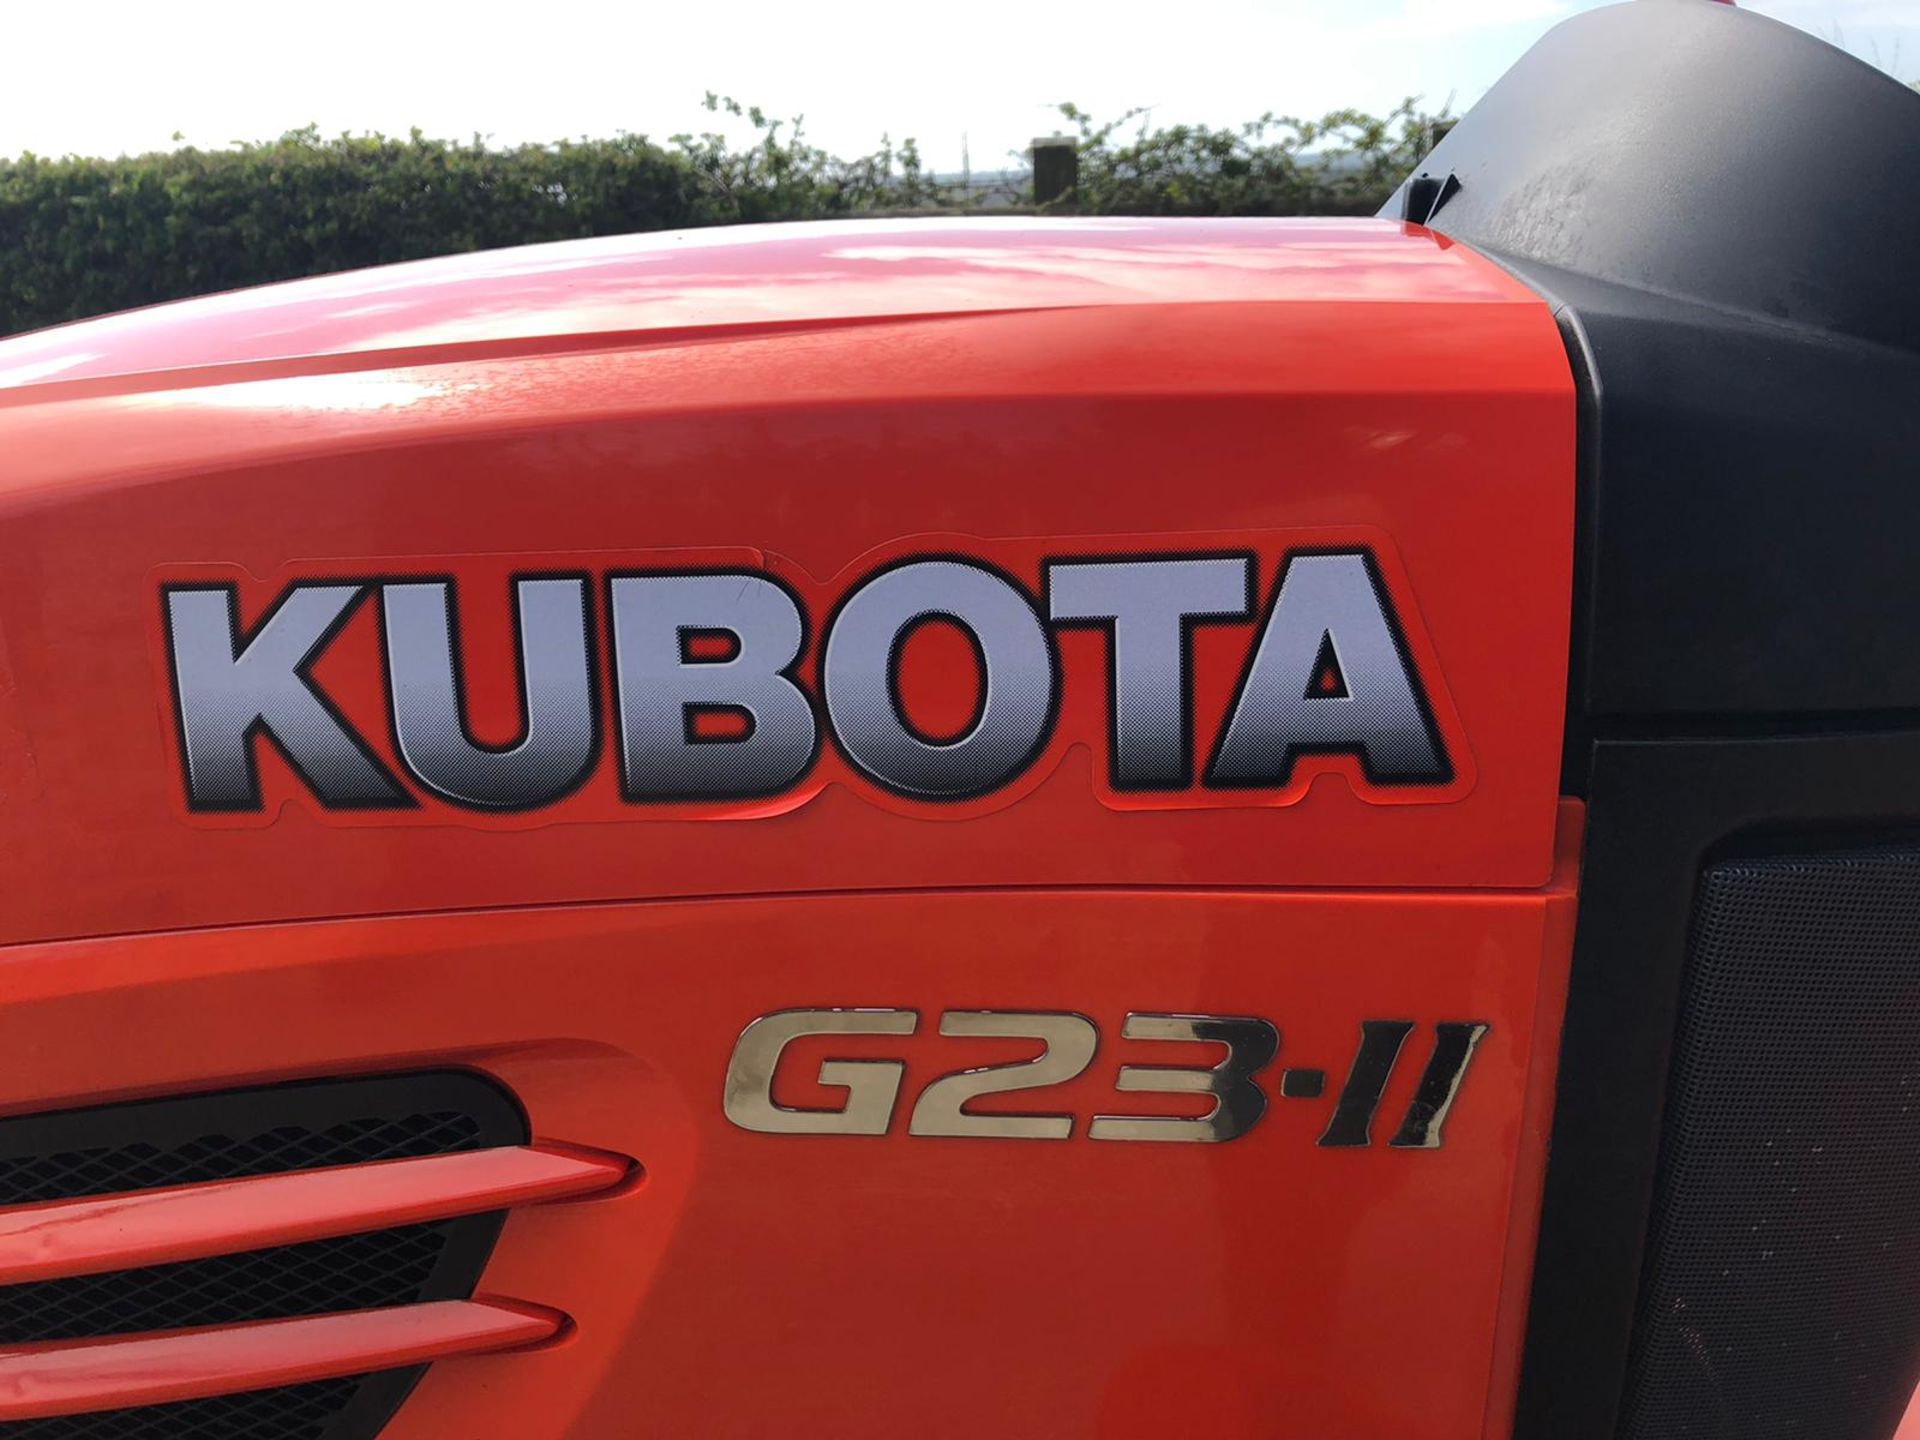 EX DEMO KUBOTA G23-11 RIDE ON LAWN MOWER - ONLY 30 HOURS FROM NEW, IN VERY GOOD CONDITION *PLUS VAT* - Image 4 of 10